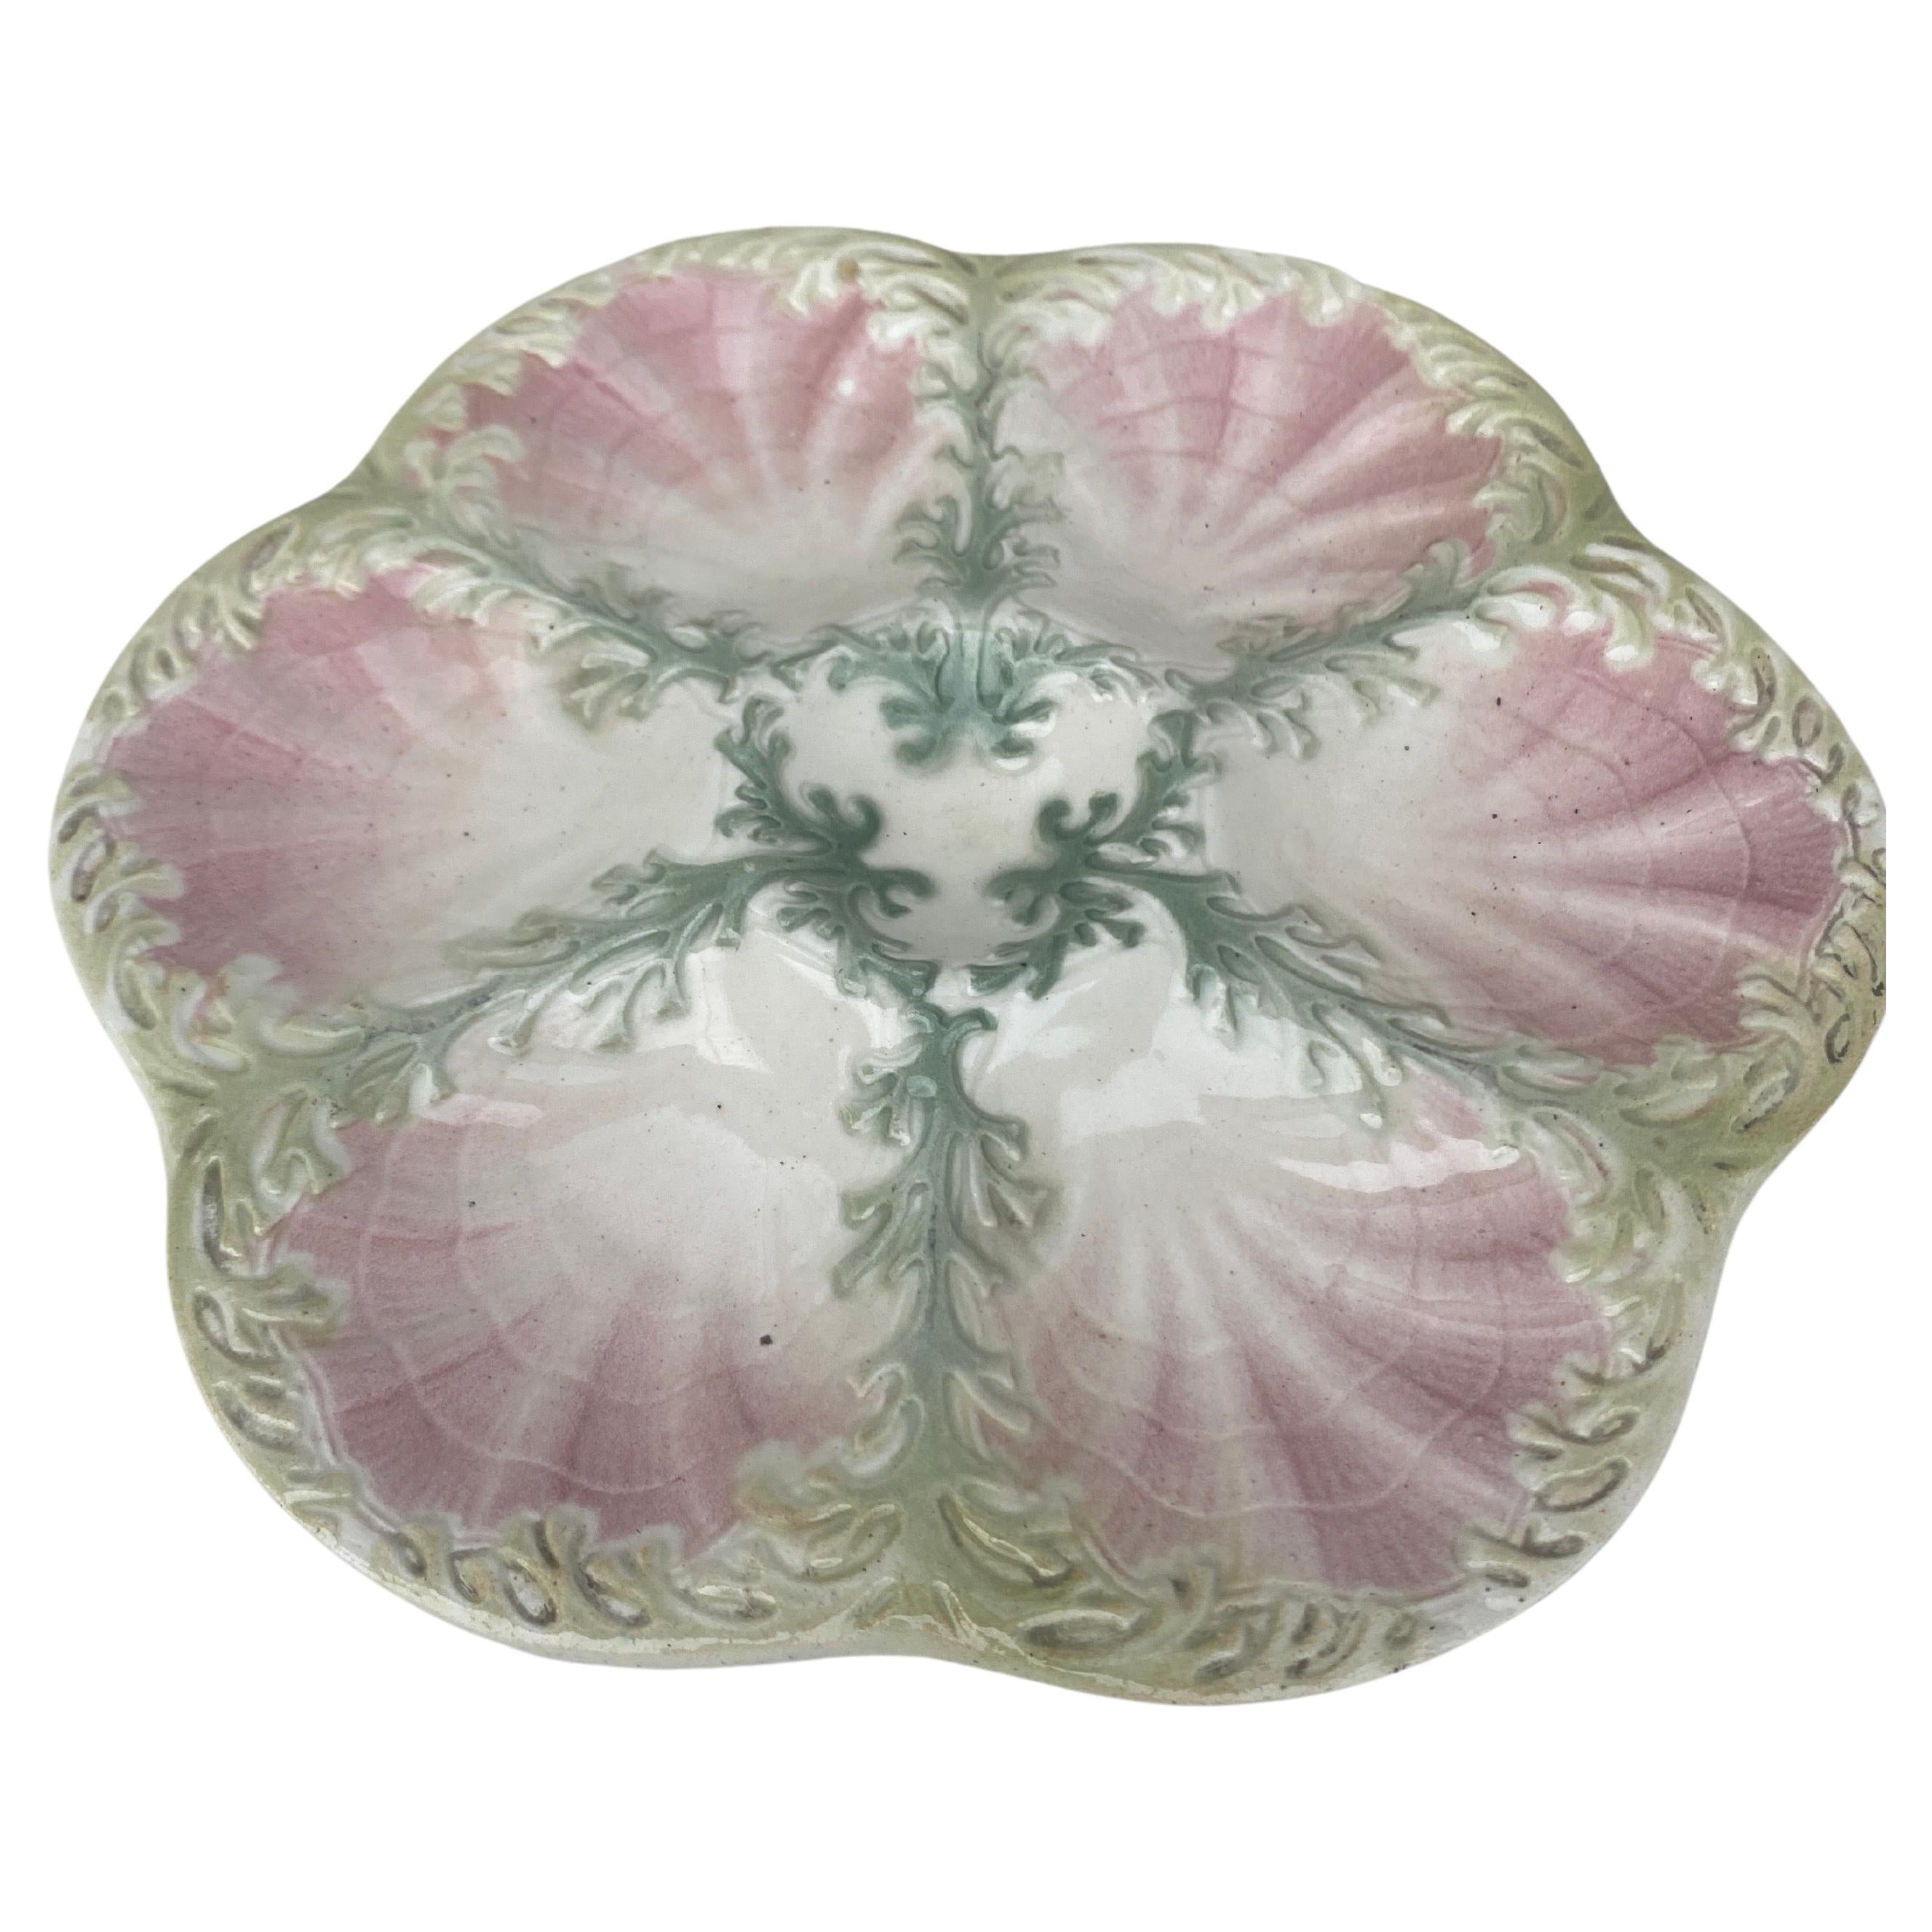 Majolica oyster plate attributed to Keller Et Guerin Saint Clement, circa 1890.
Reference / page 98 